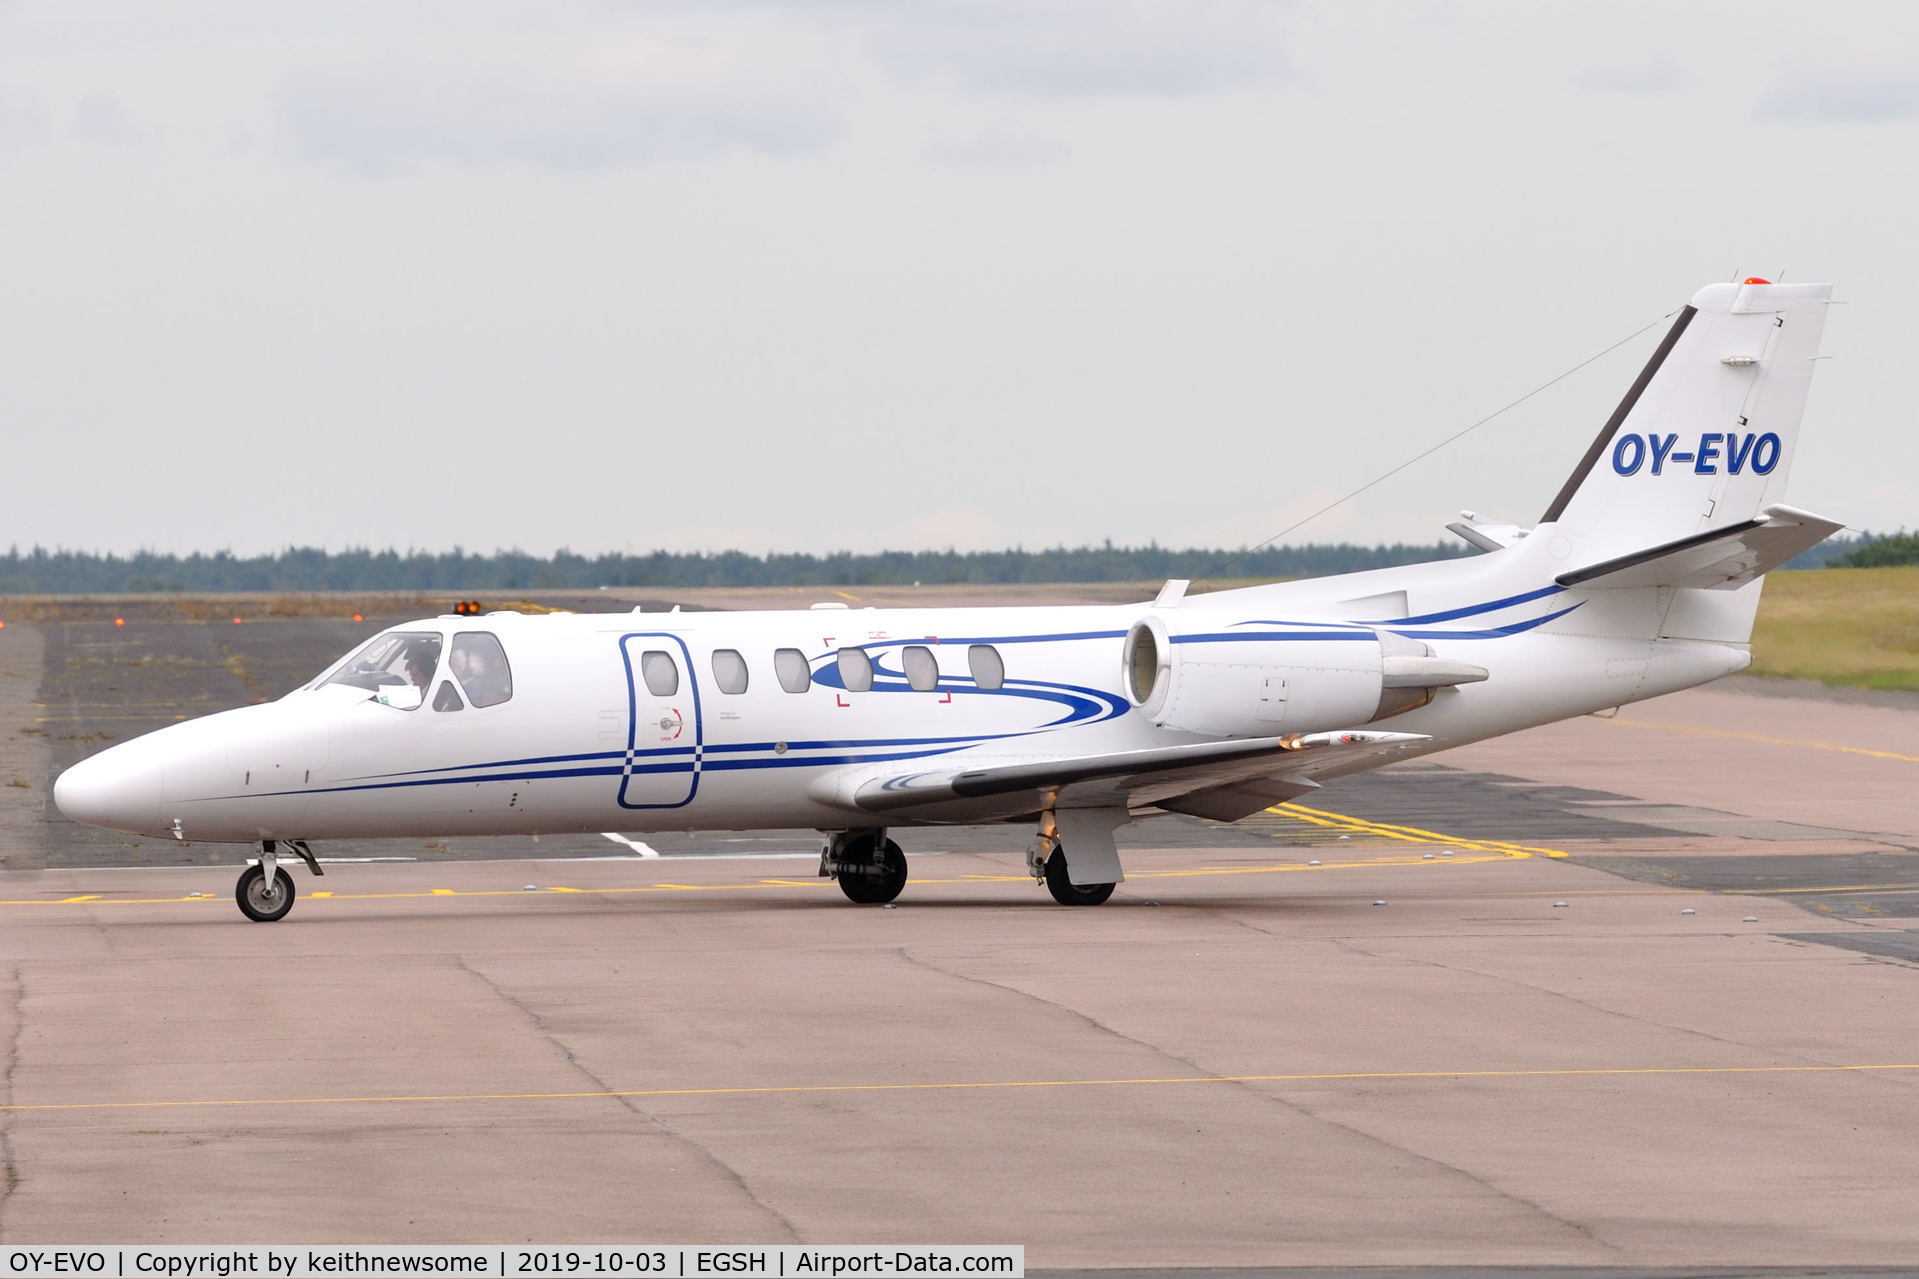 OY-EVO, 2003 Cessna 550 Citation Bravo C/N 550-1050, Arriving at Norwich from Luton.